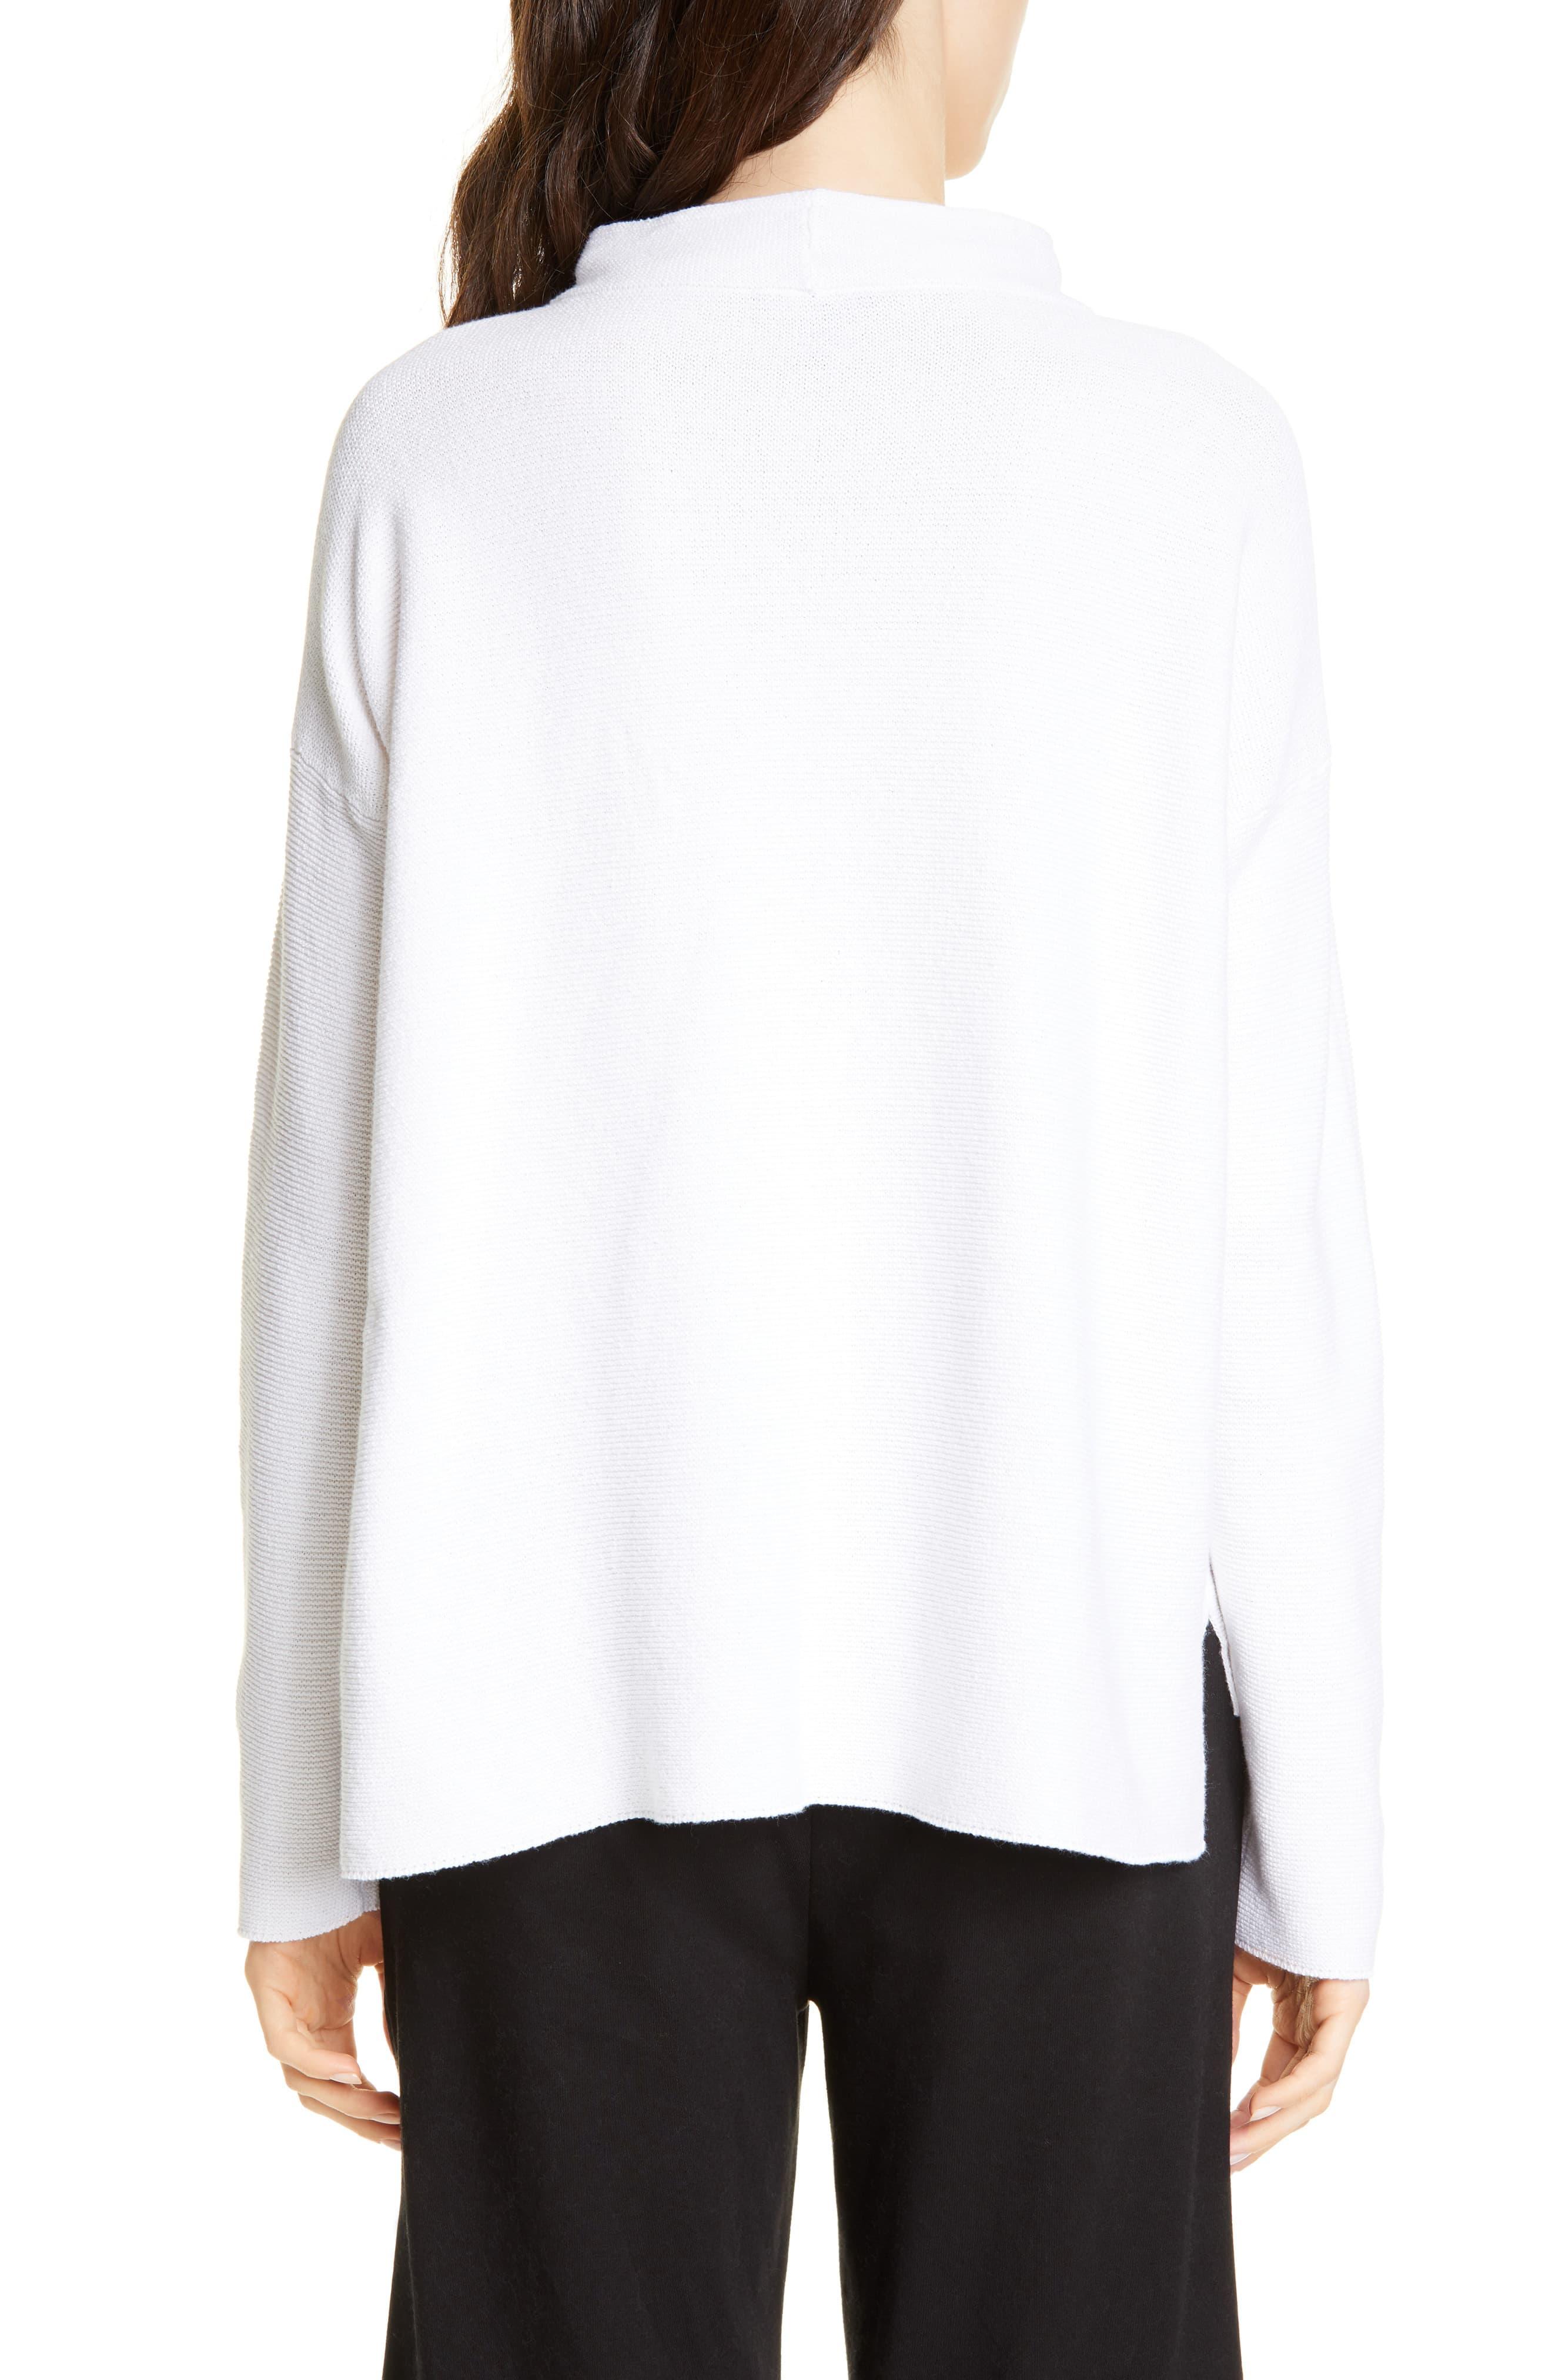 Eileen Fisher Funnel Neck Rib Sweater in White - Lyst